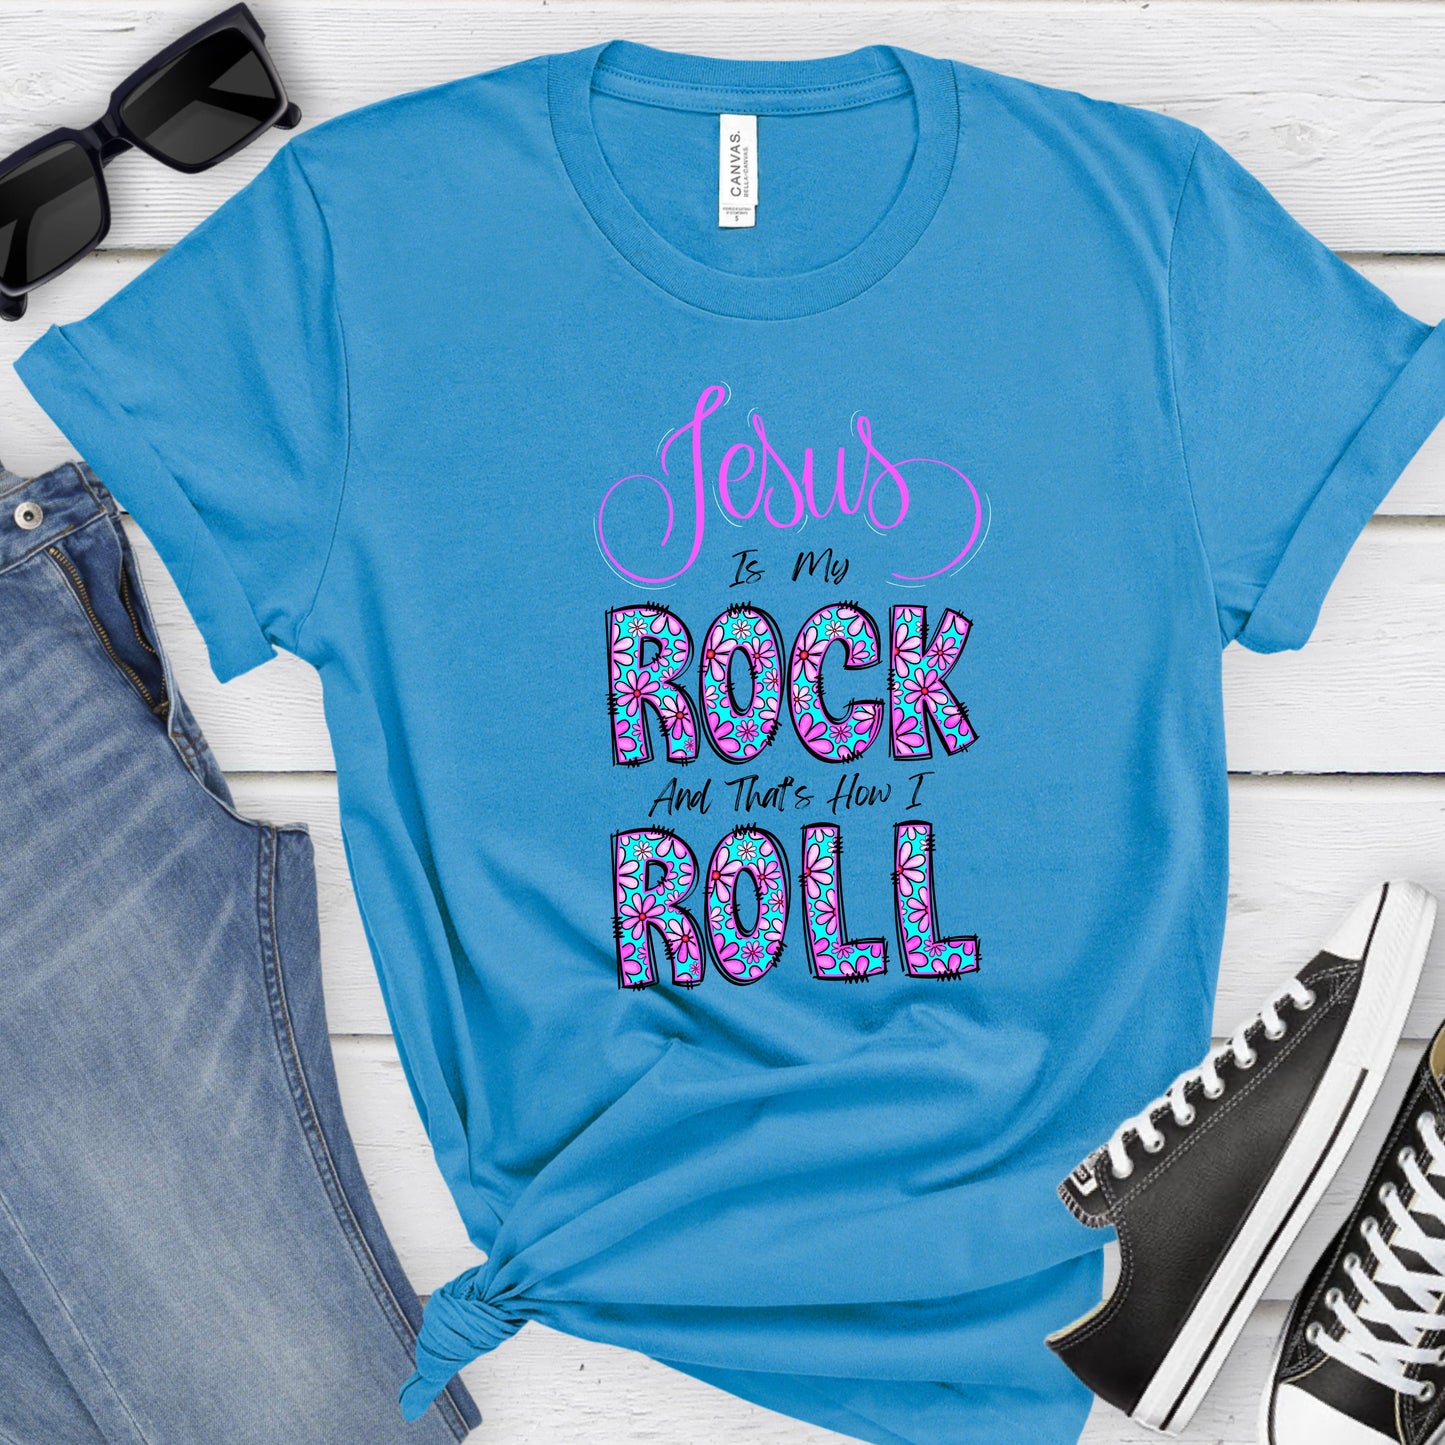 Jesus Is My Rock and Thats How I Roll Short Sleeve Tee, Inspirational T-Shirt, Jesus T-Shirt, Christian T-Shirt, Religious T-Shirt